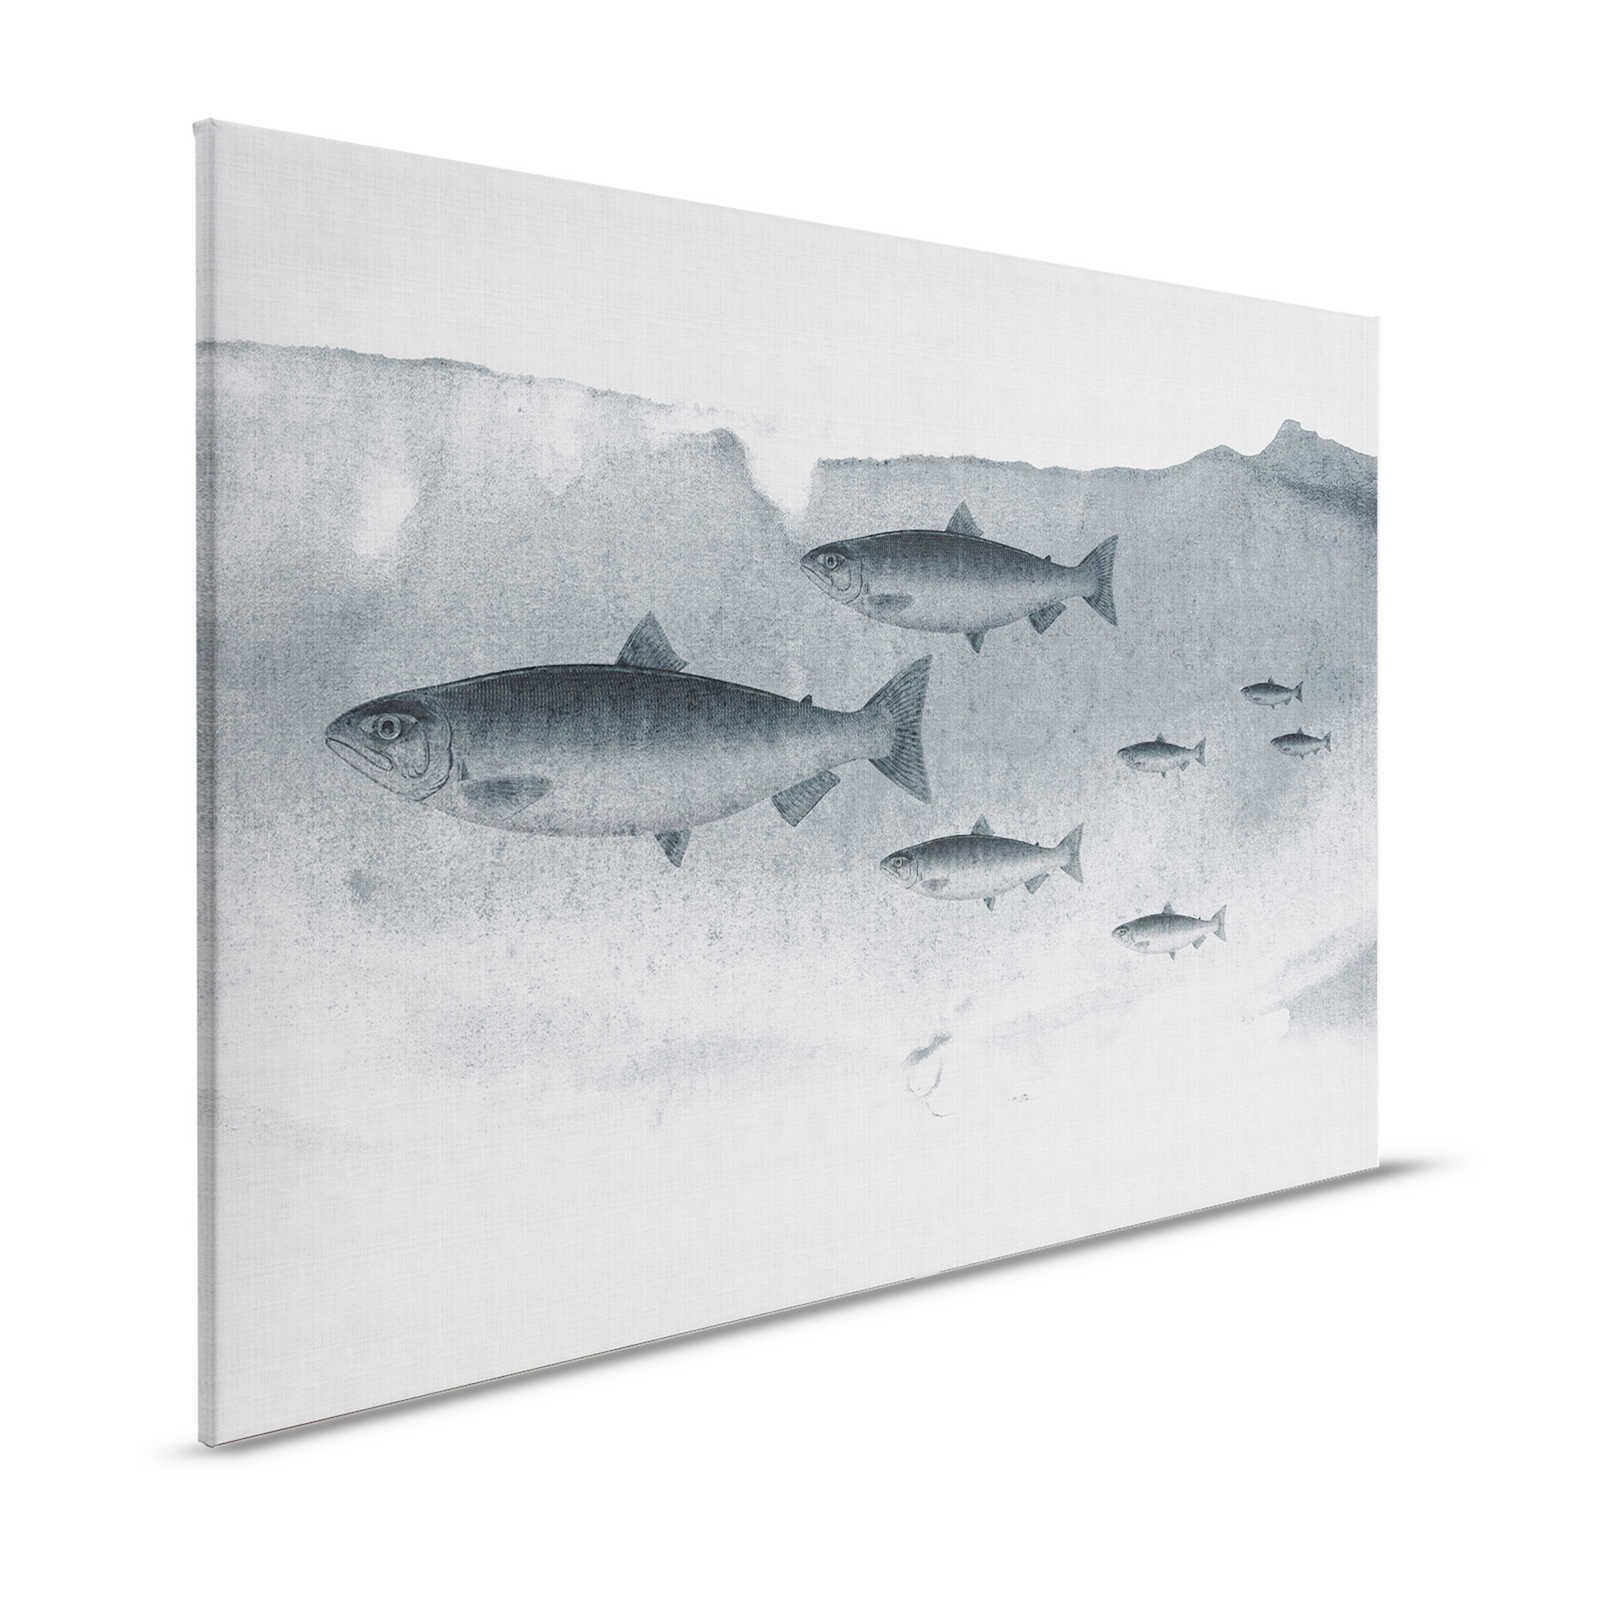 Into the blue 3 - Fish watercolour in grey as a canvas picture - 1.20 m x 0.80 m
